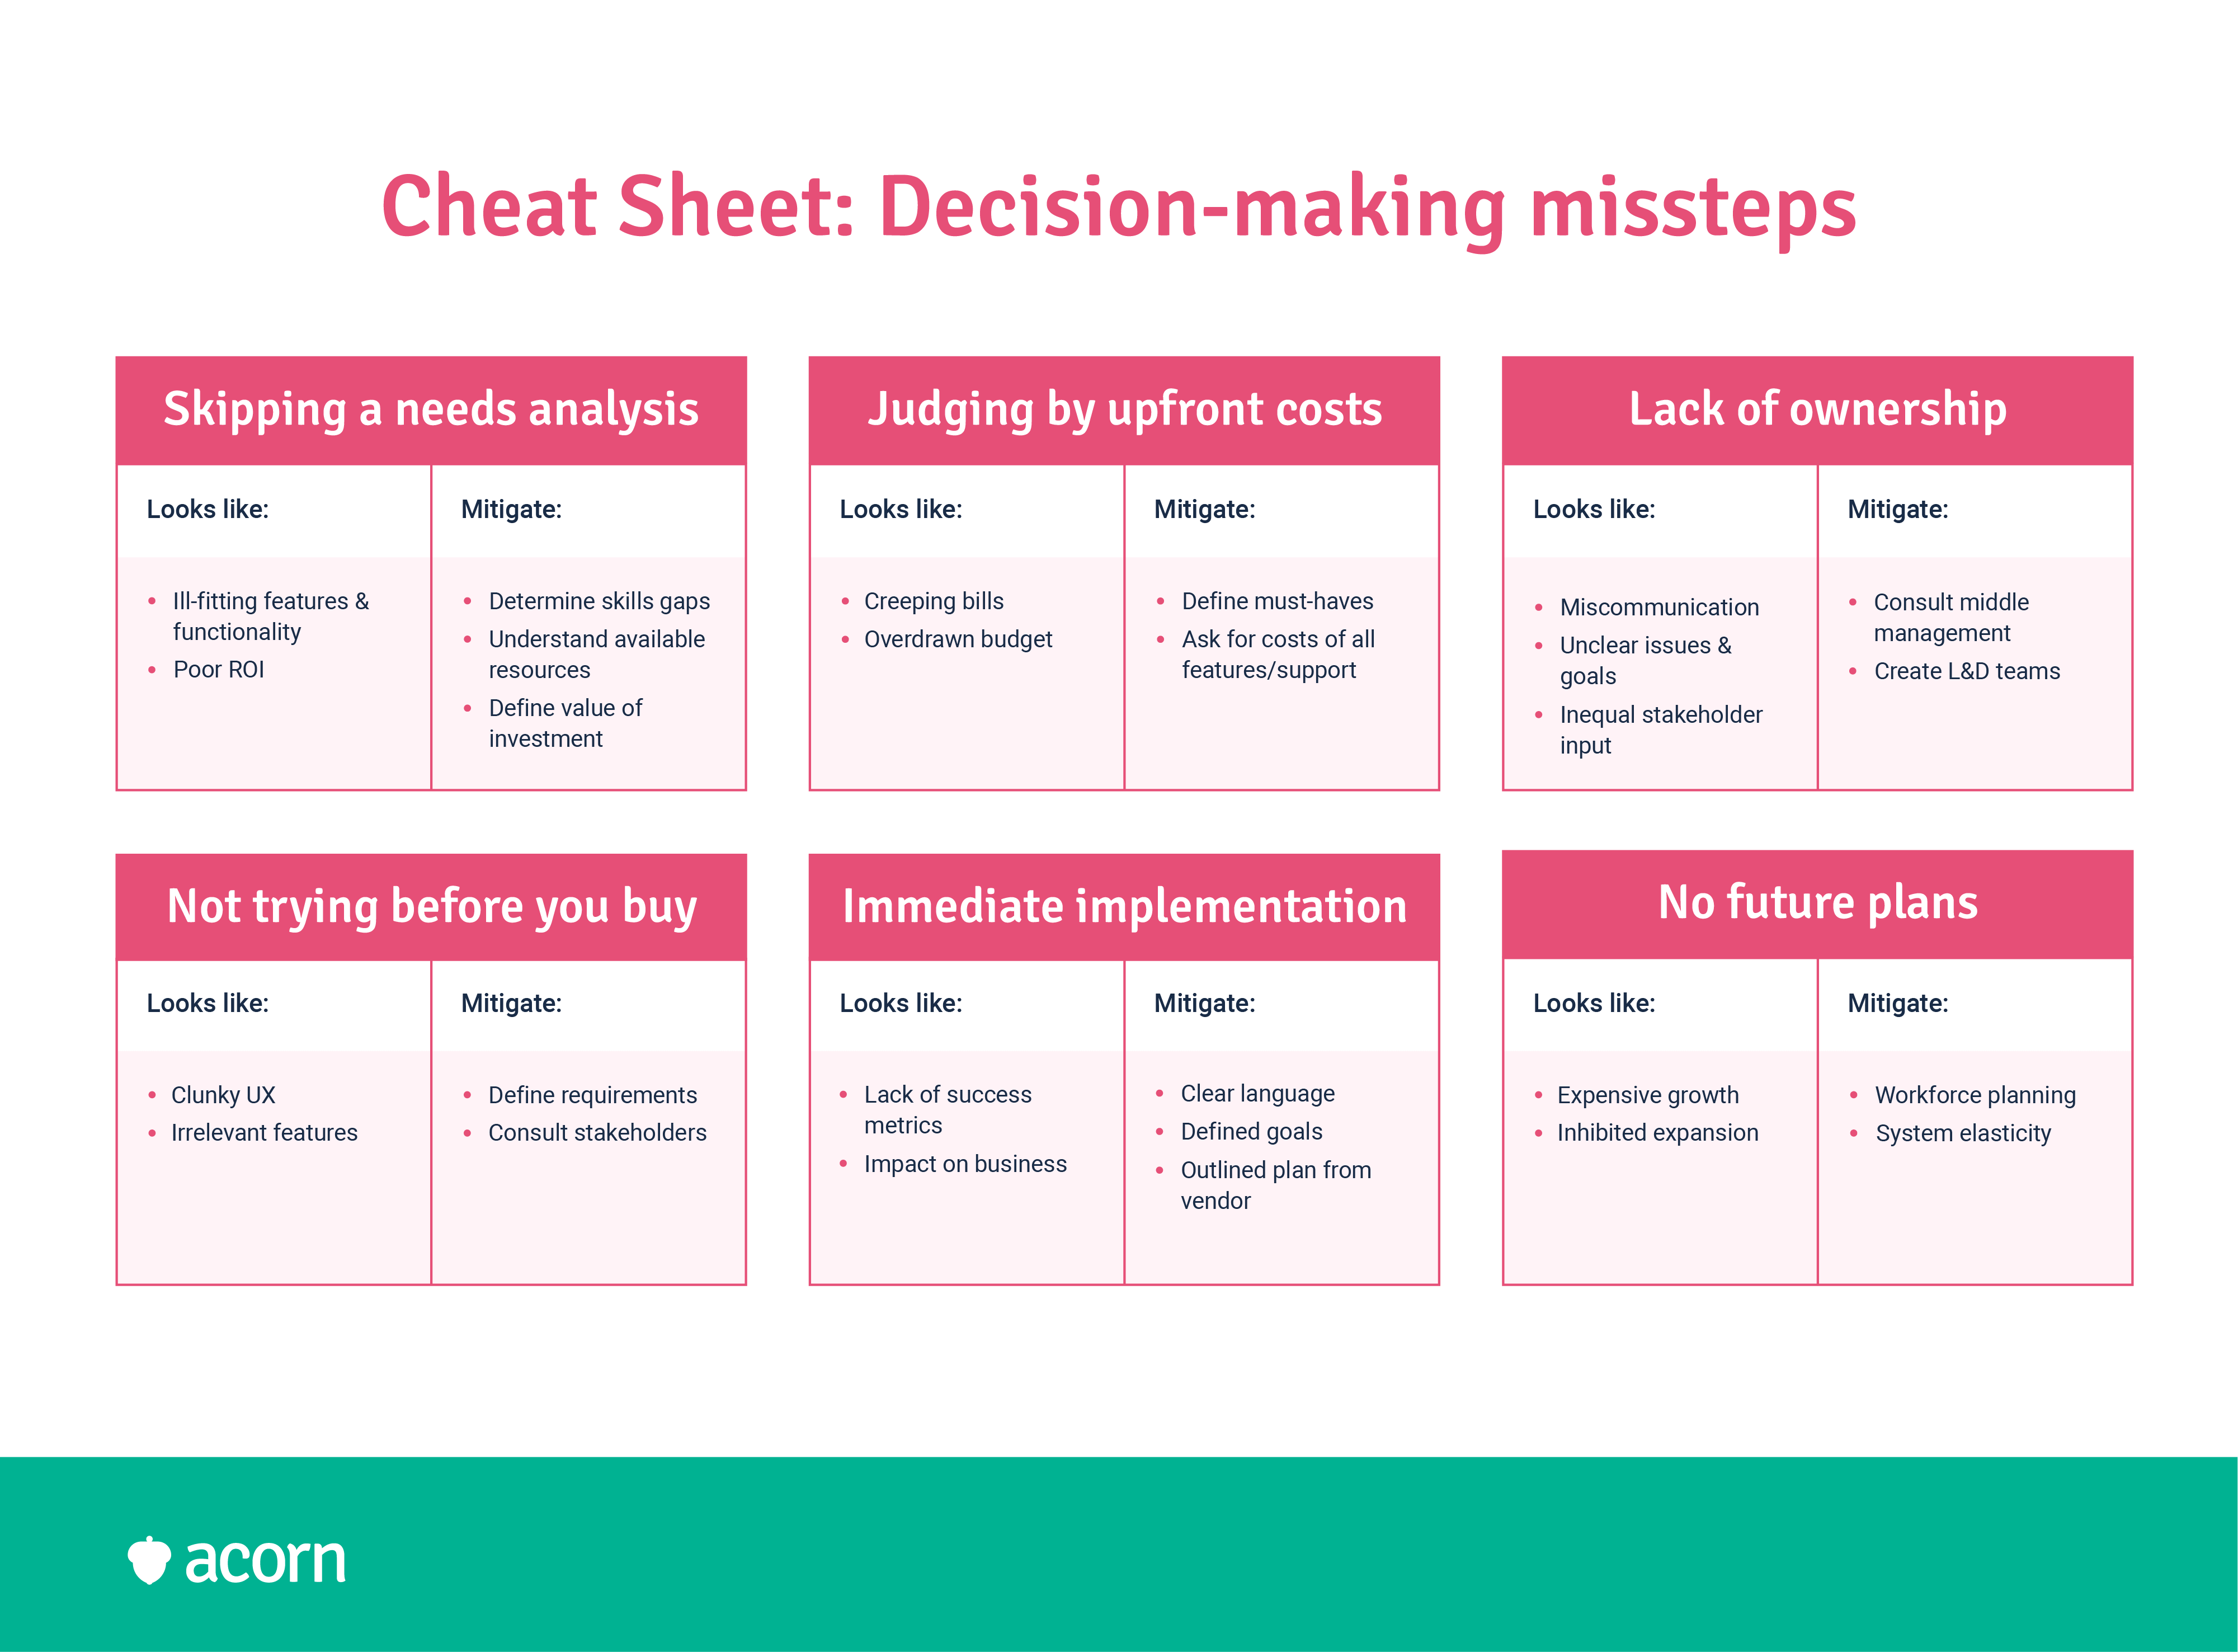 Tables outlining decision-making missteps associated with LMSs and how to mitigate them. 